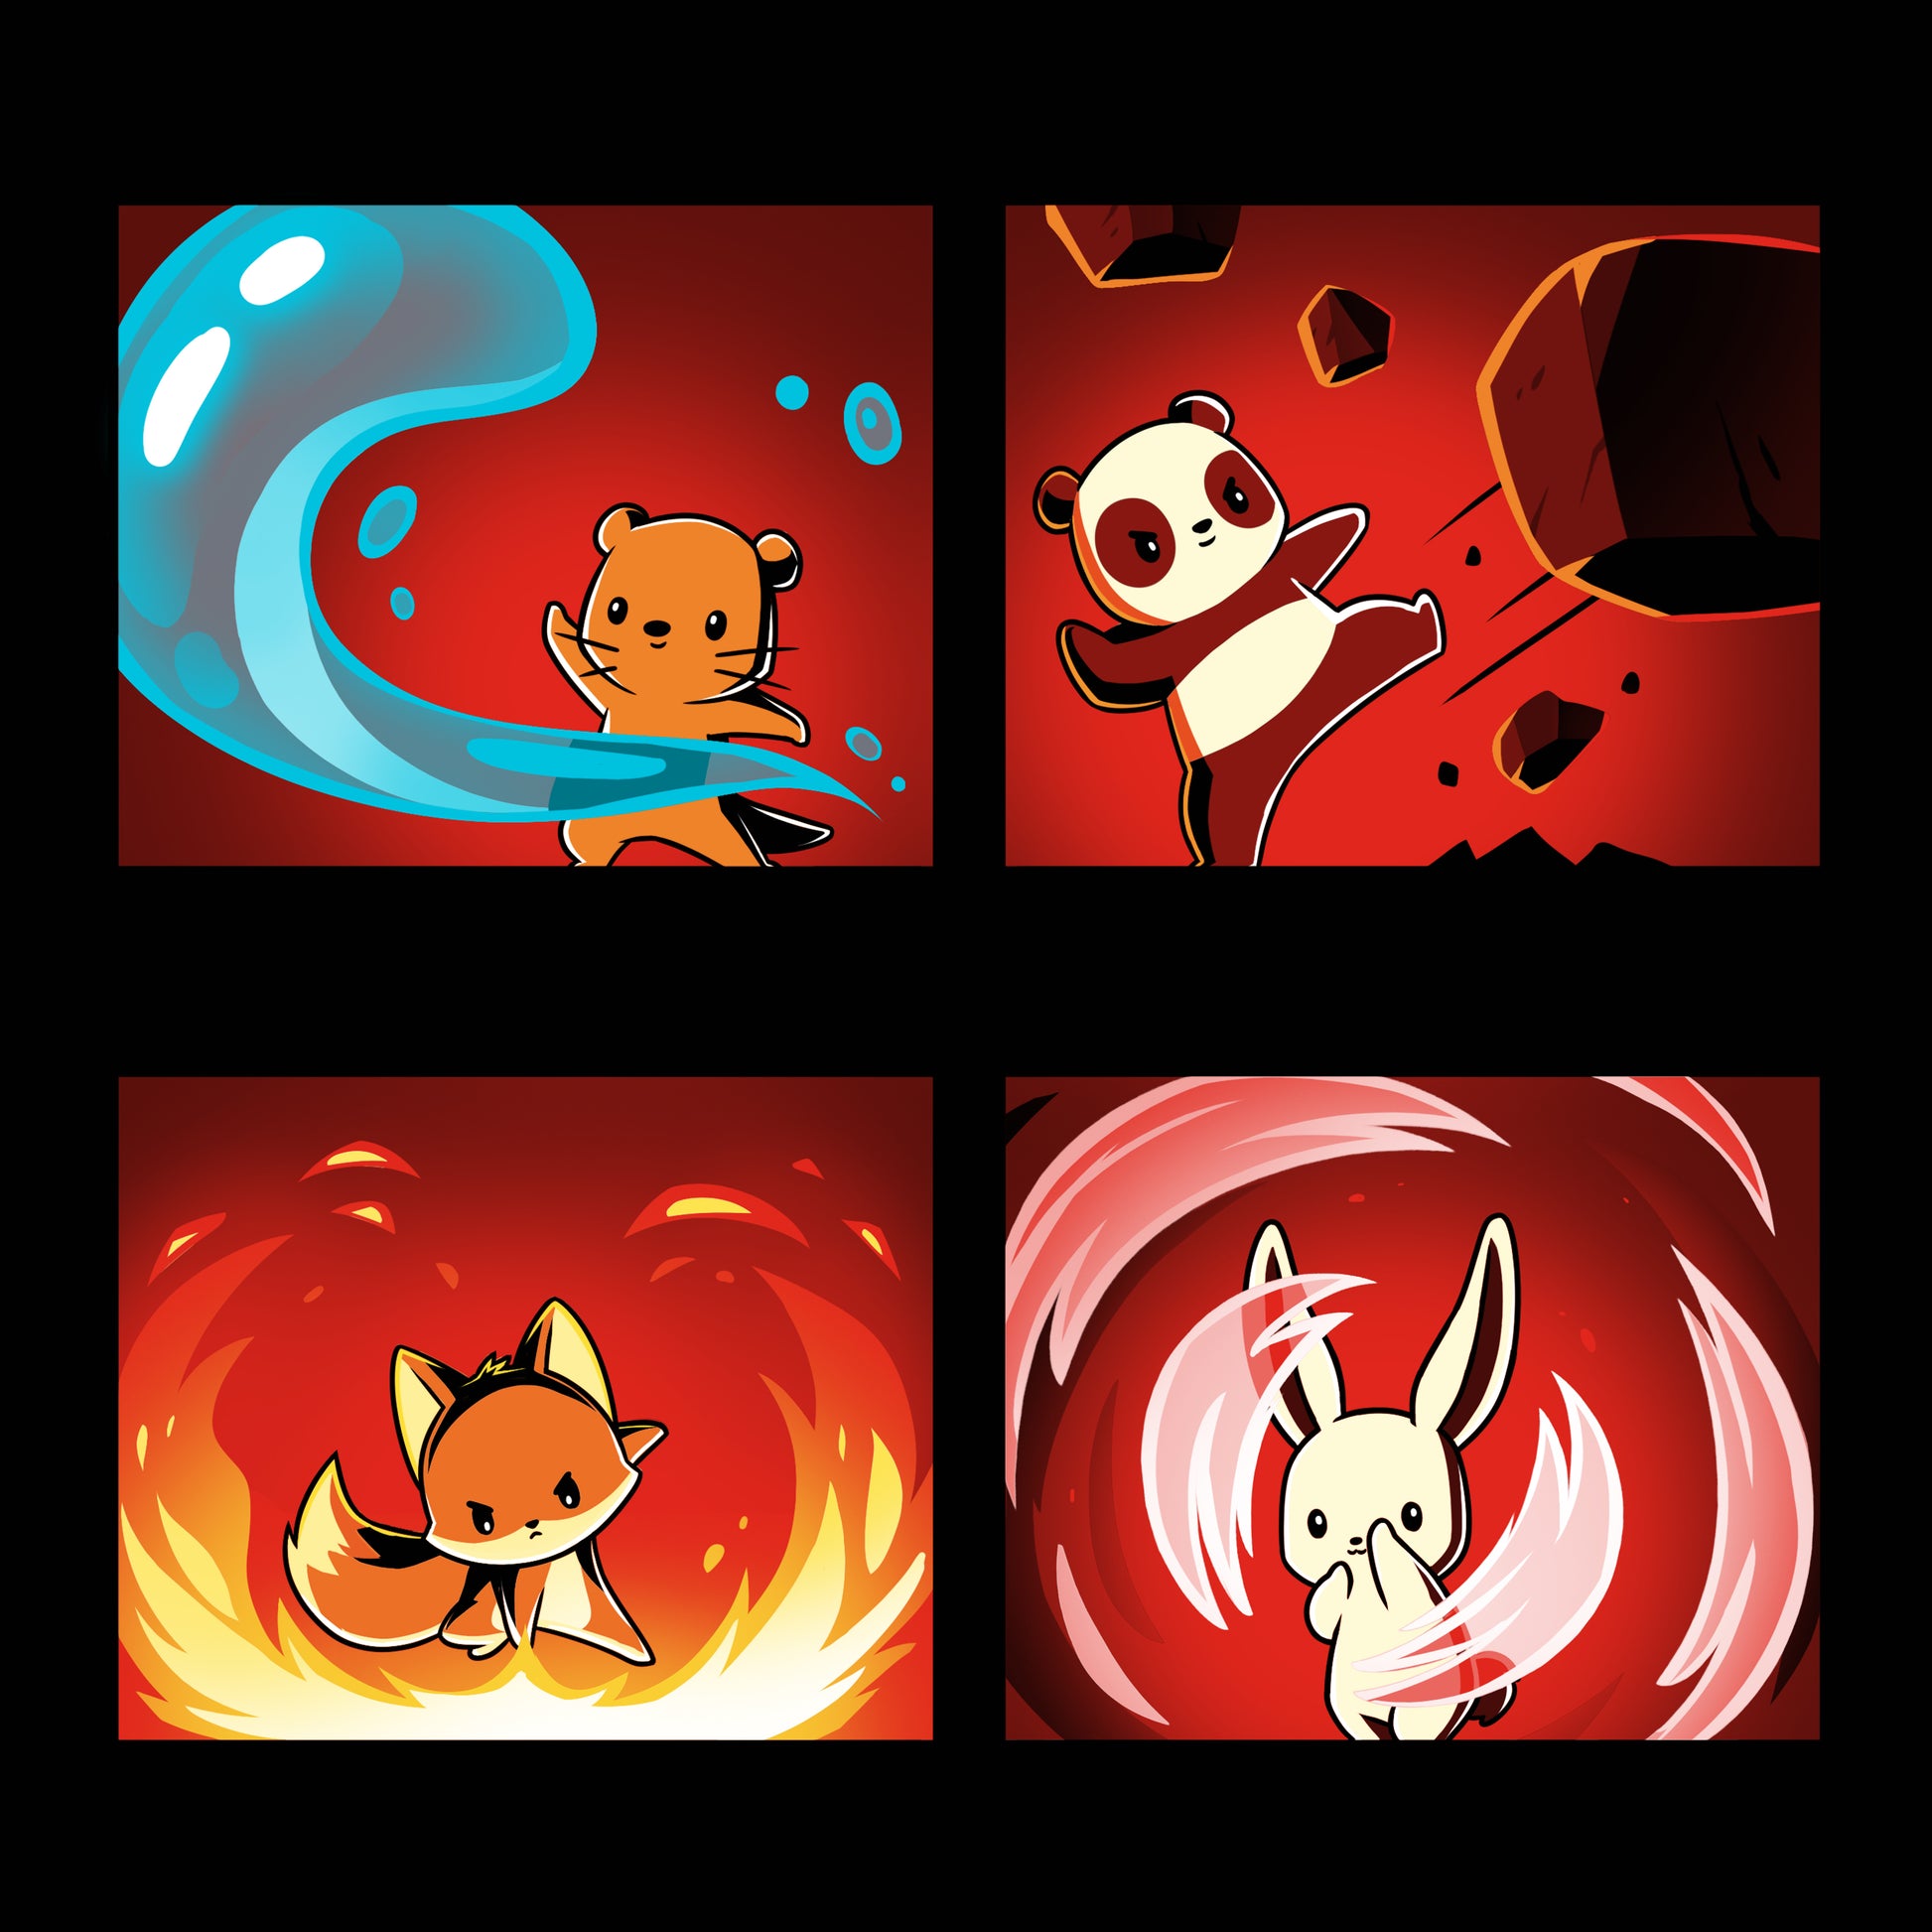 A set of four TeeTurtle Bending the Elements pictures featuring a panda and a fox, showcasing Earth bending.